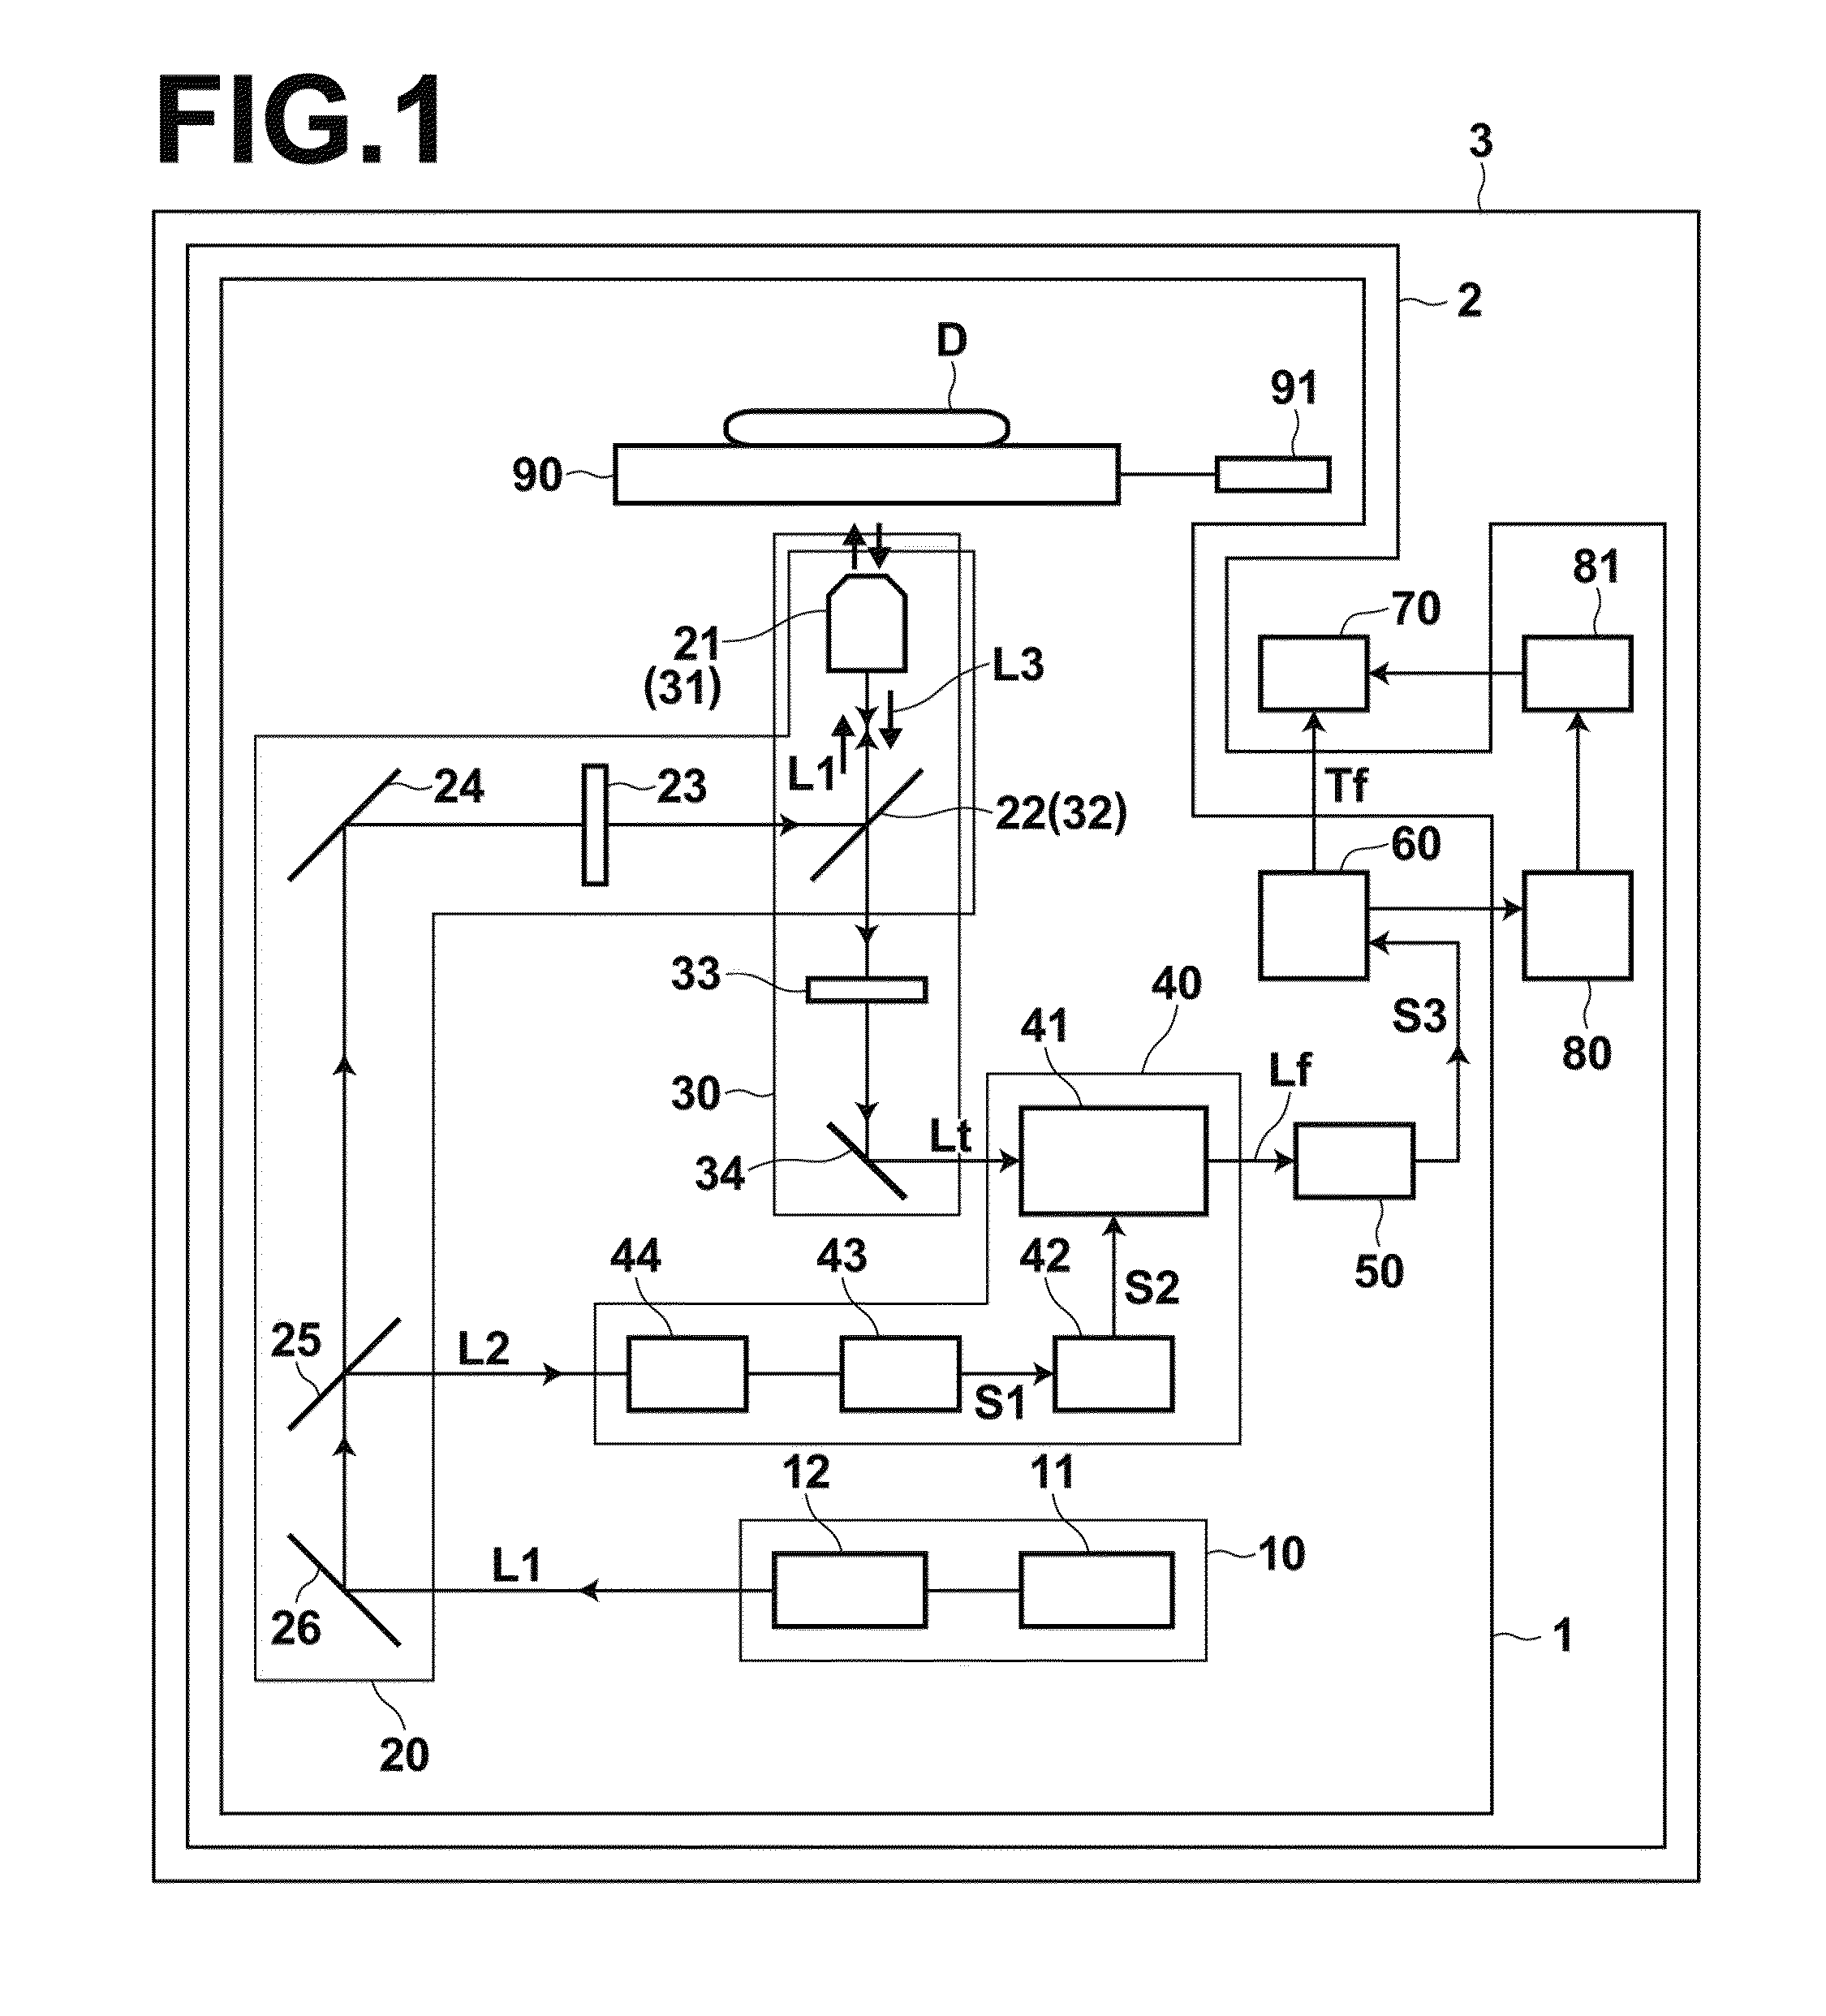 INTRACELLULAR pH IMAGING METHOD AND APPARATUS USING FLURESCENCE LIFETIME